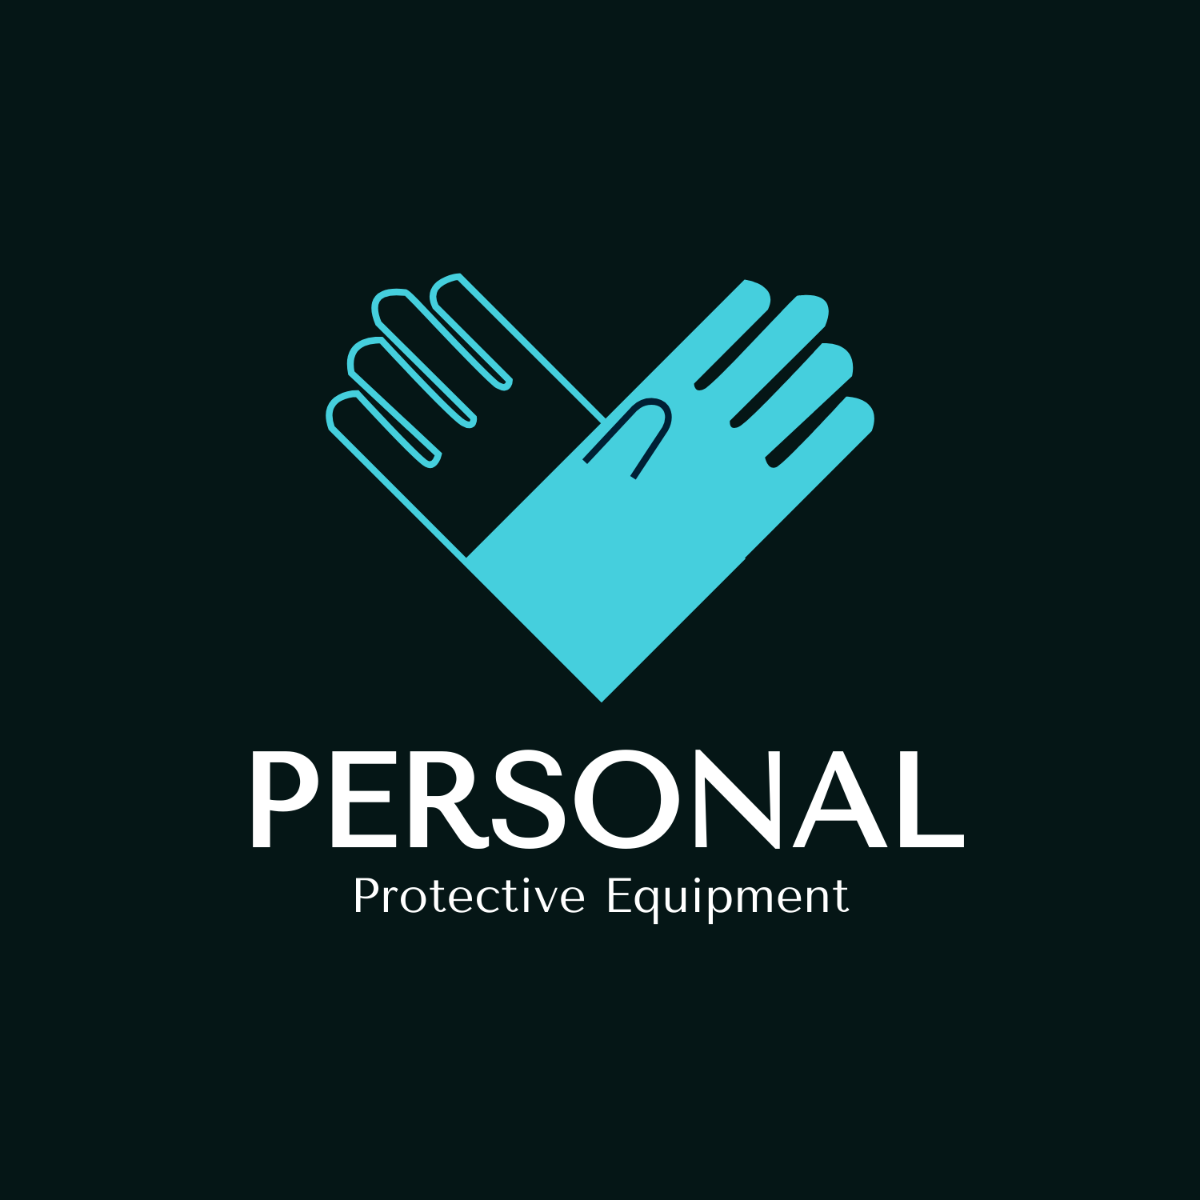 Personal Protective Equipment (PPE) Logo Template